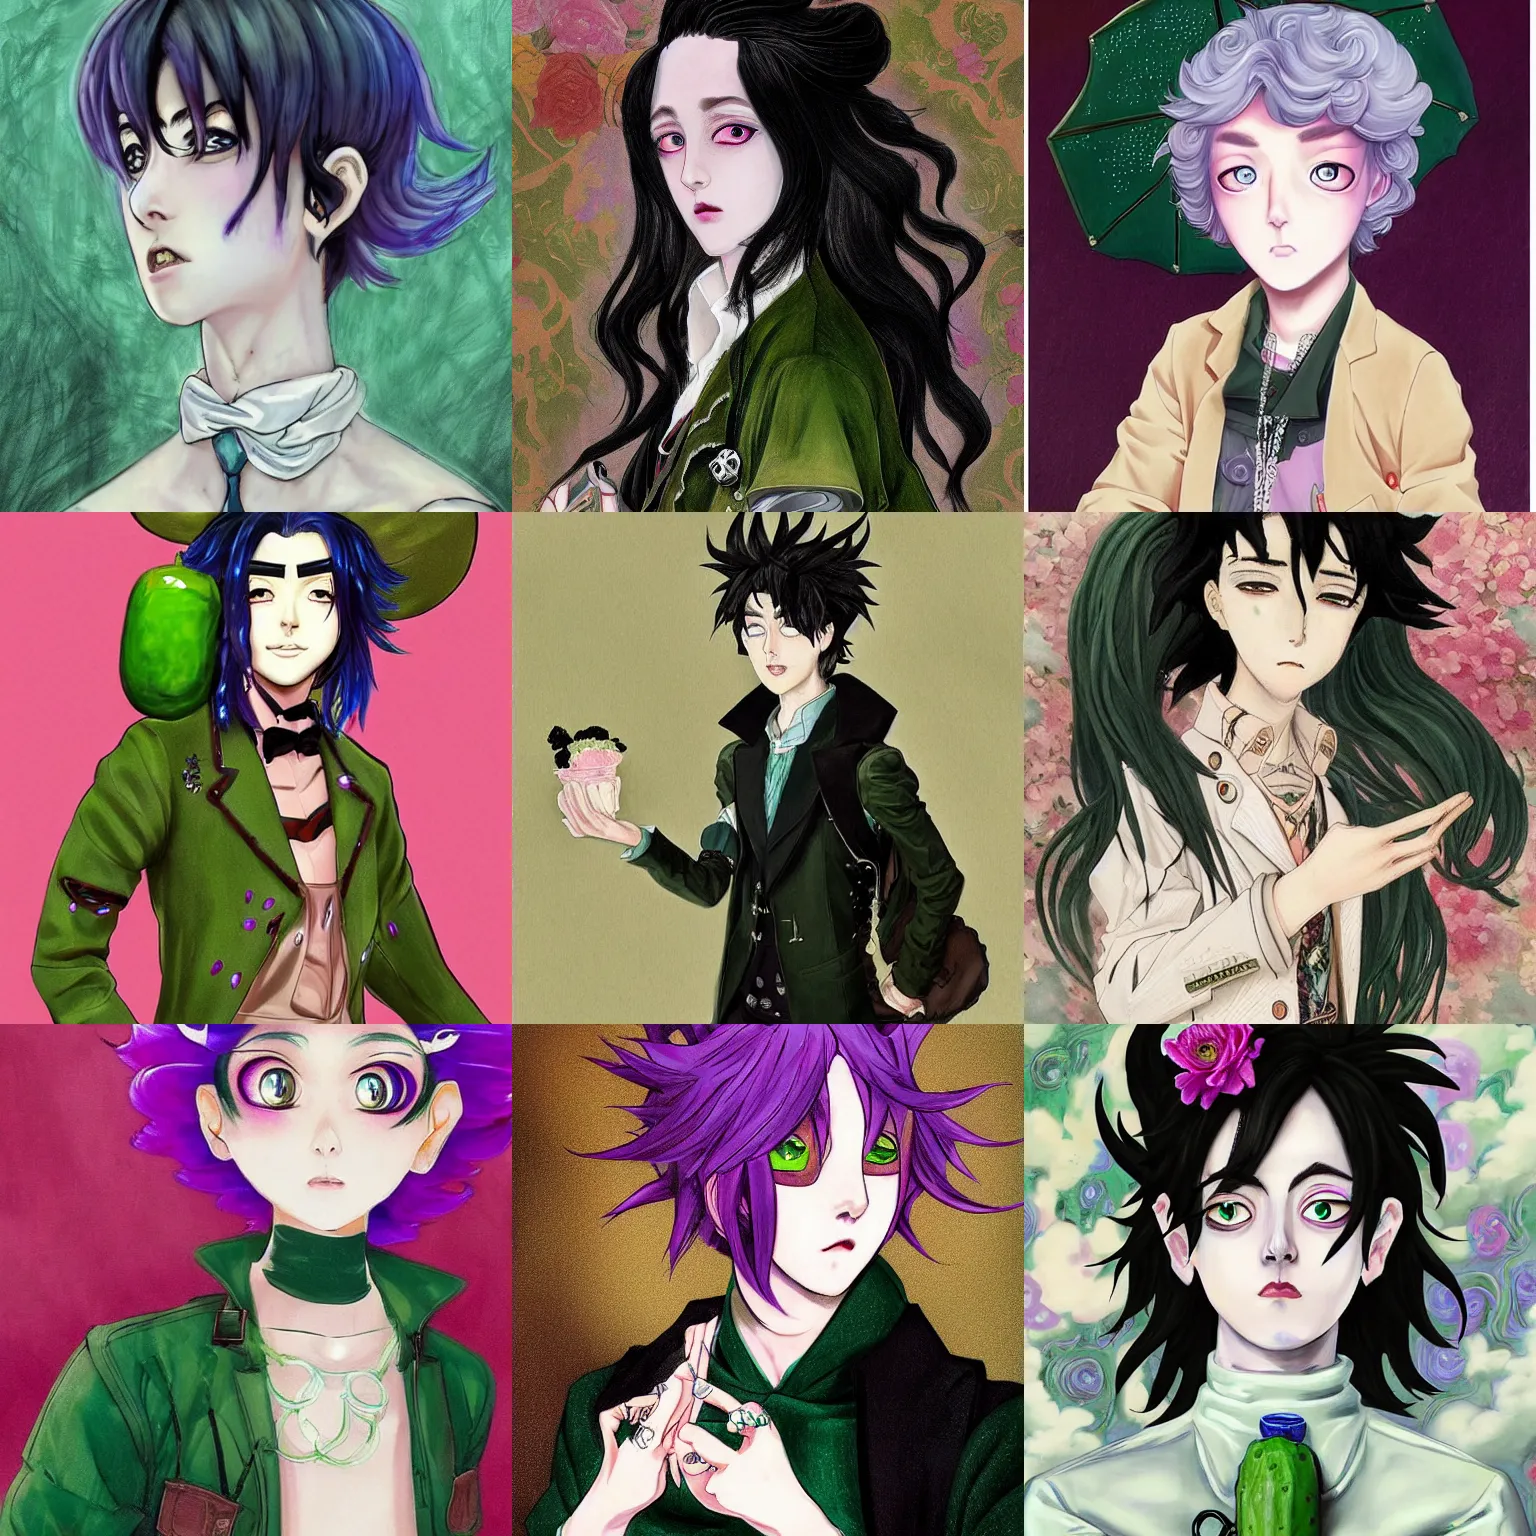 Prompt: Pickle Rick as a handsome bishounen, non-binary, androgynous, cool tousled hair, style is a blend of John singer Sargent paintings and Japanese shoujo manga, inspired by pastel goth, pre-raphaelite paintings, harajuku street fashion, photorealistic art, insanely beautiful and detailed illustration